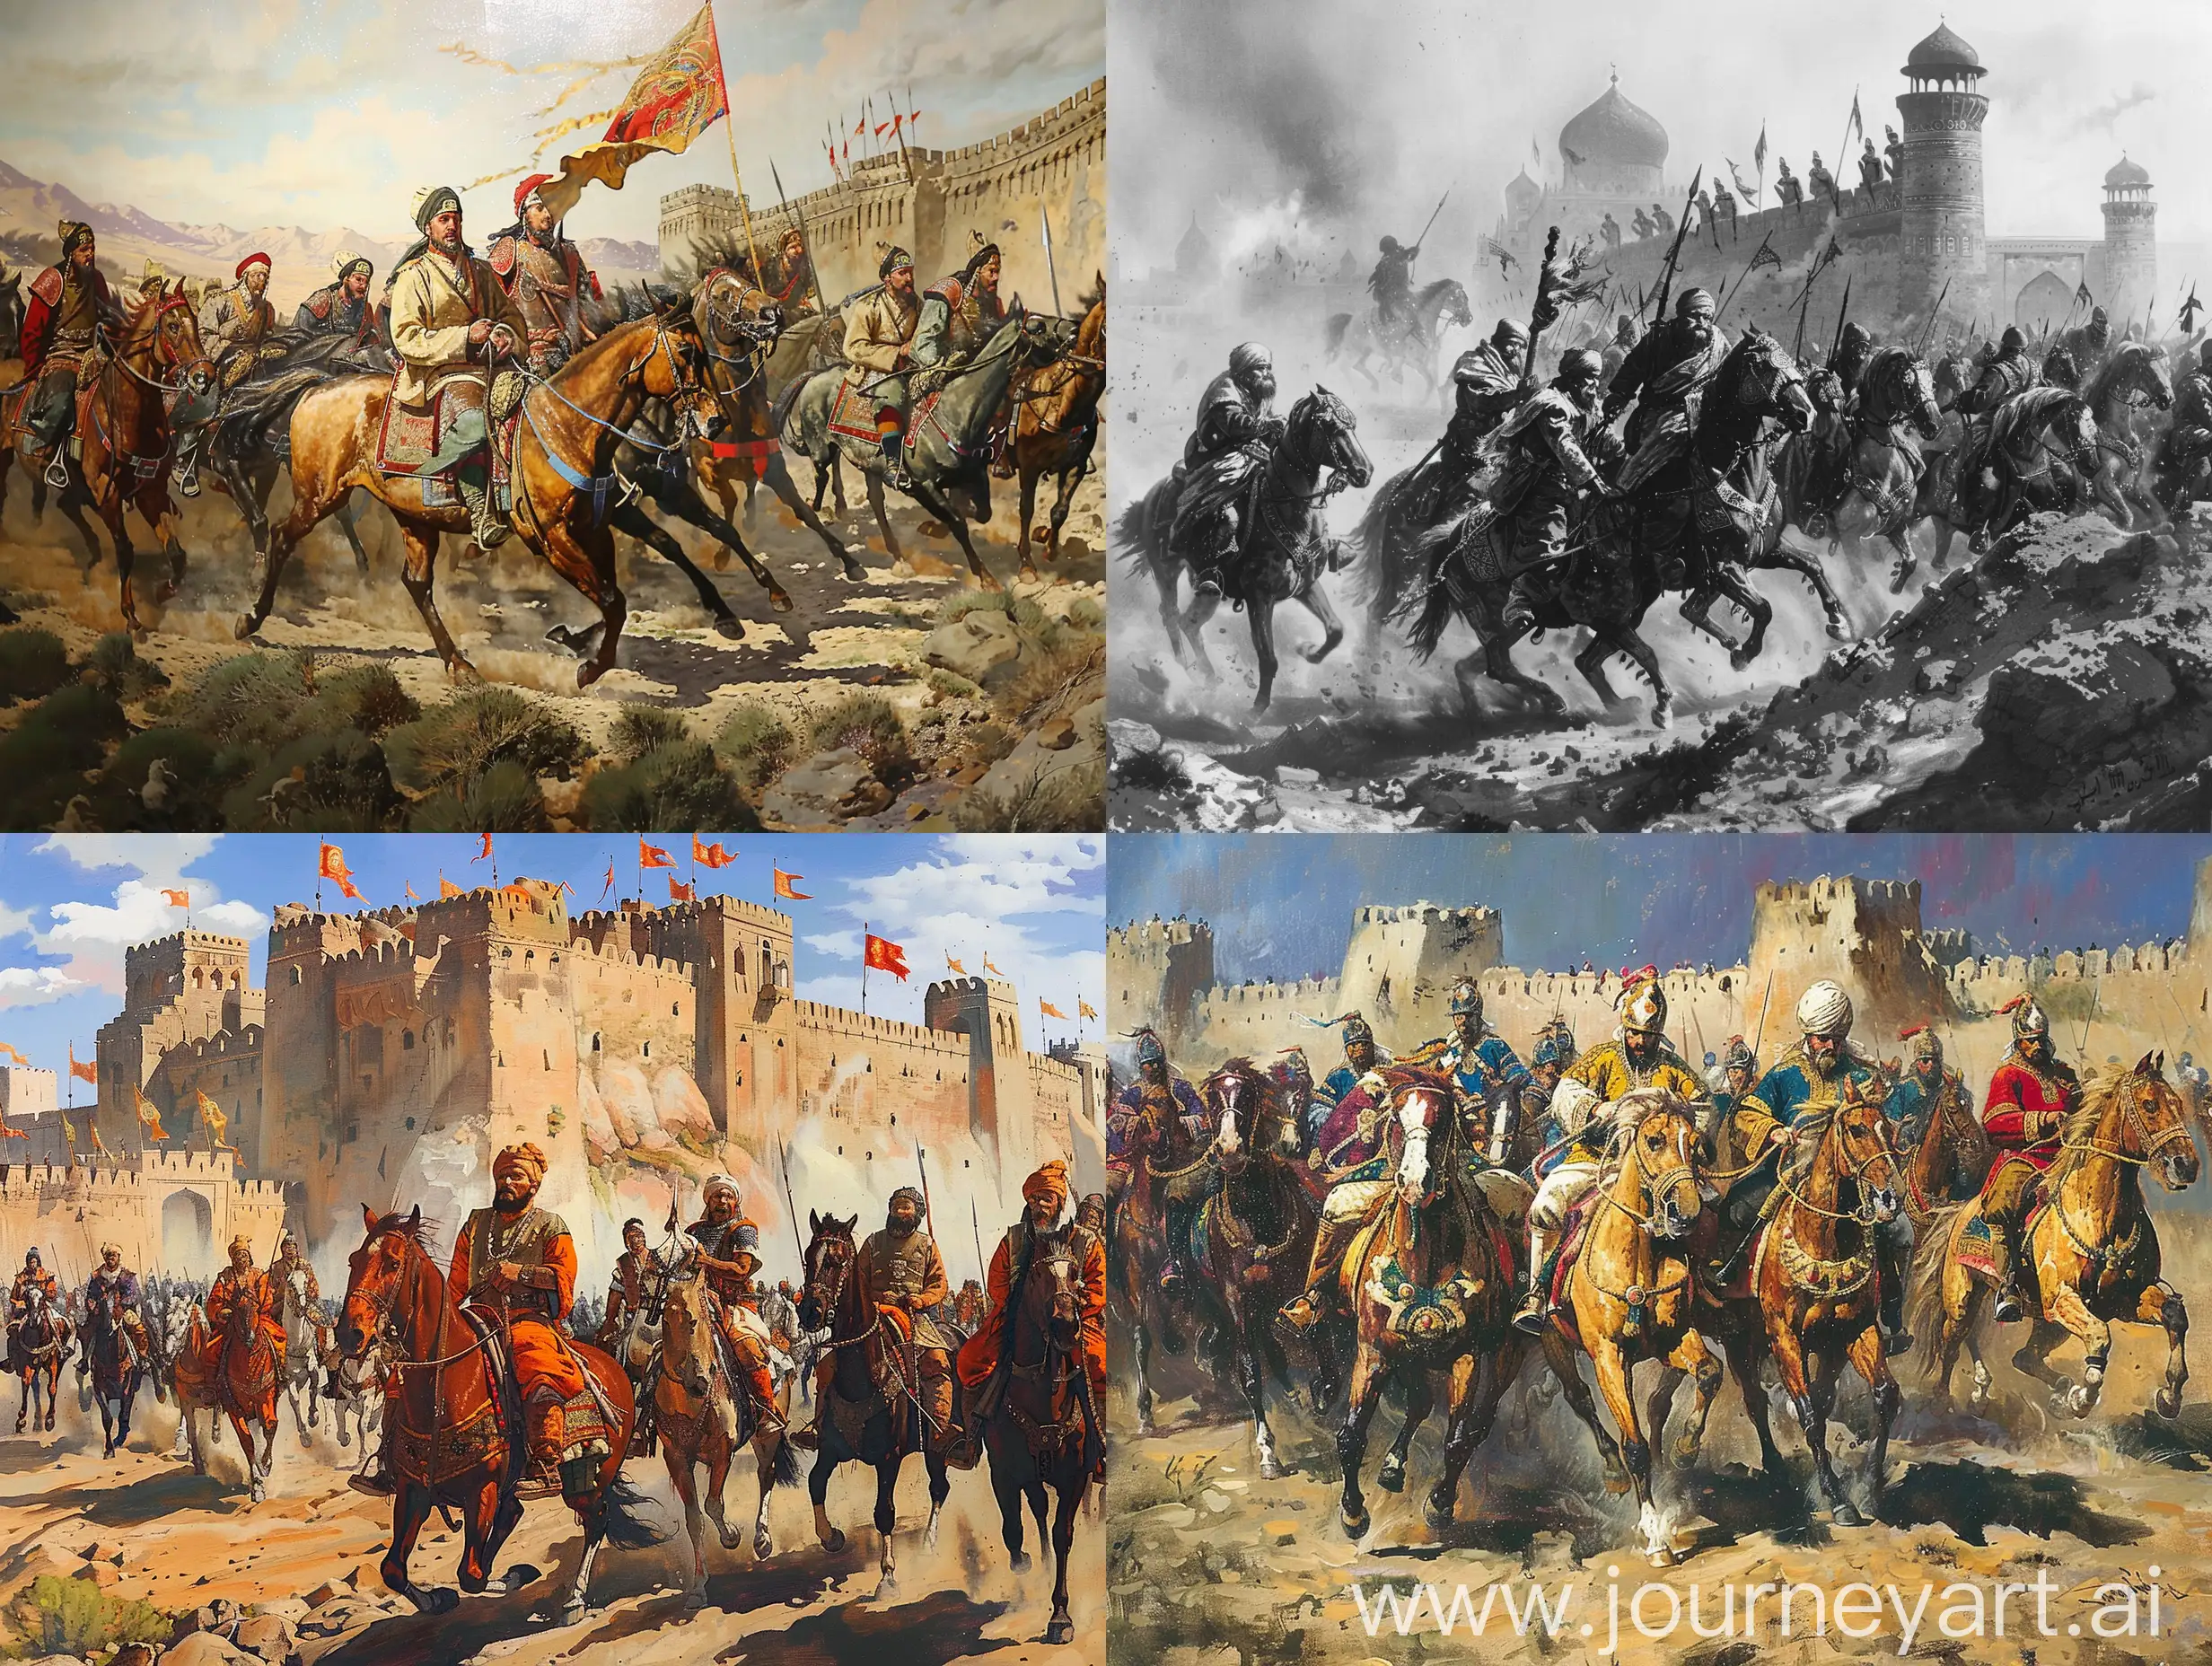 Historical-Conquests-ArabMongol-Conflict-in-Samarkand